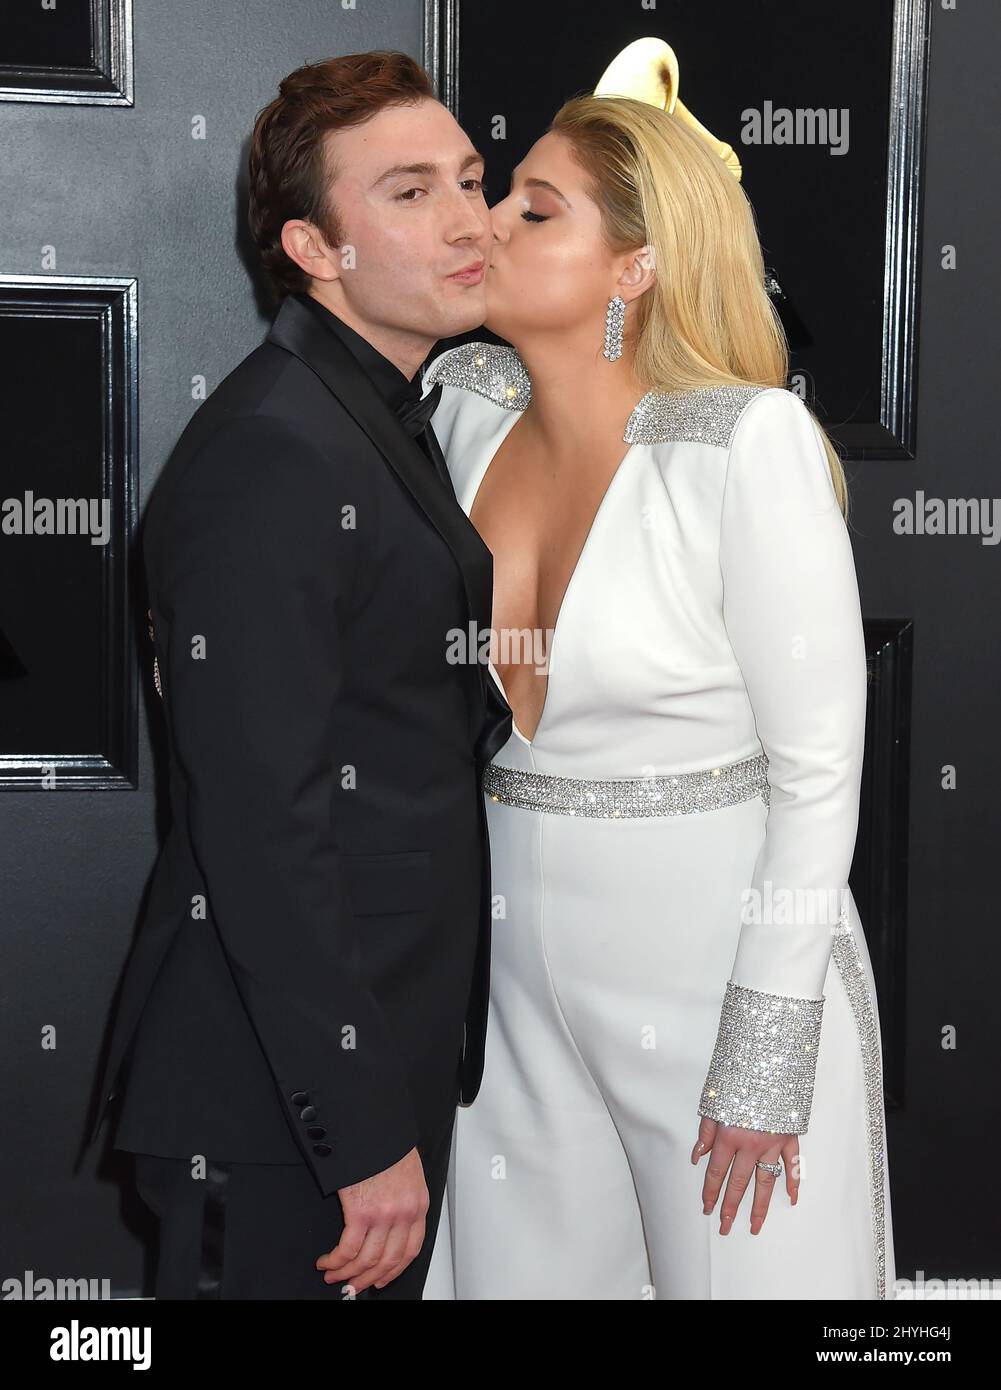 Daryl Sabara And Meghan Trainor At The 61st Annual Grammy Awards Held At Staples Center On 9667